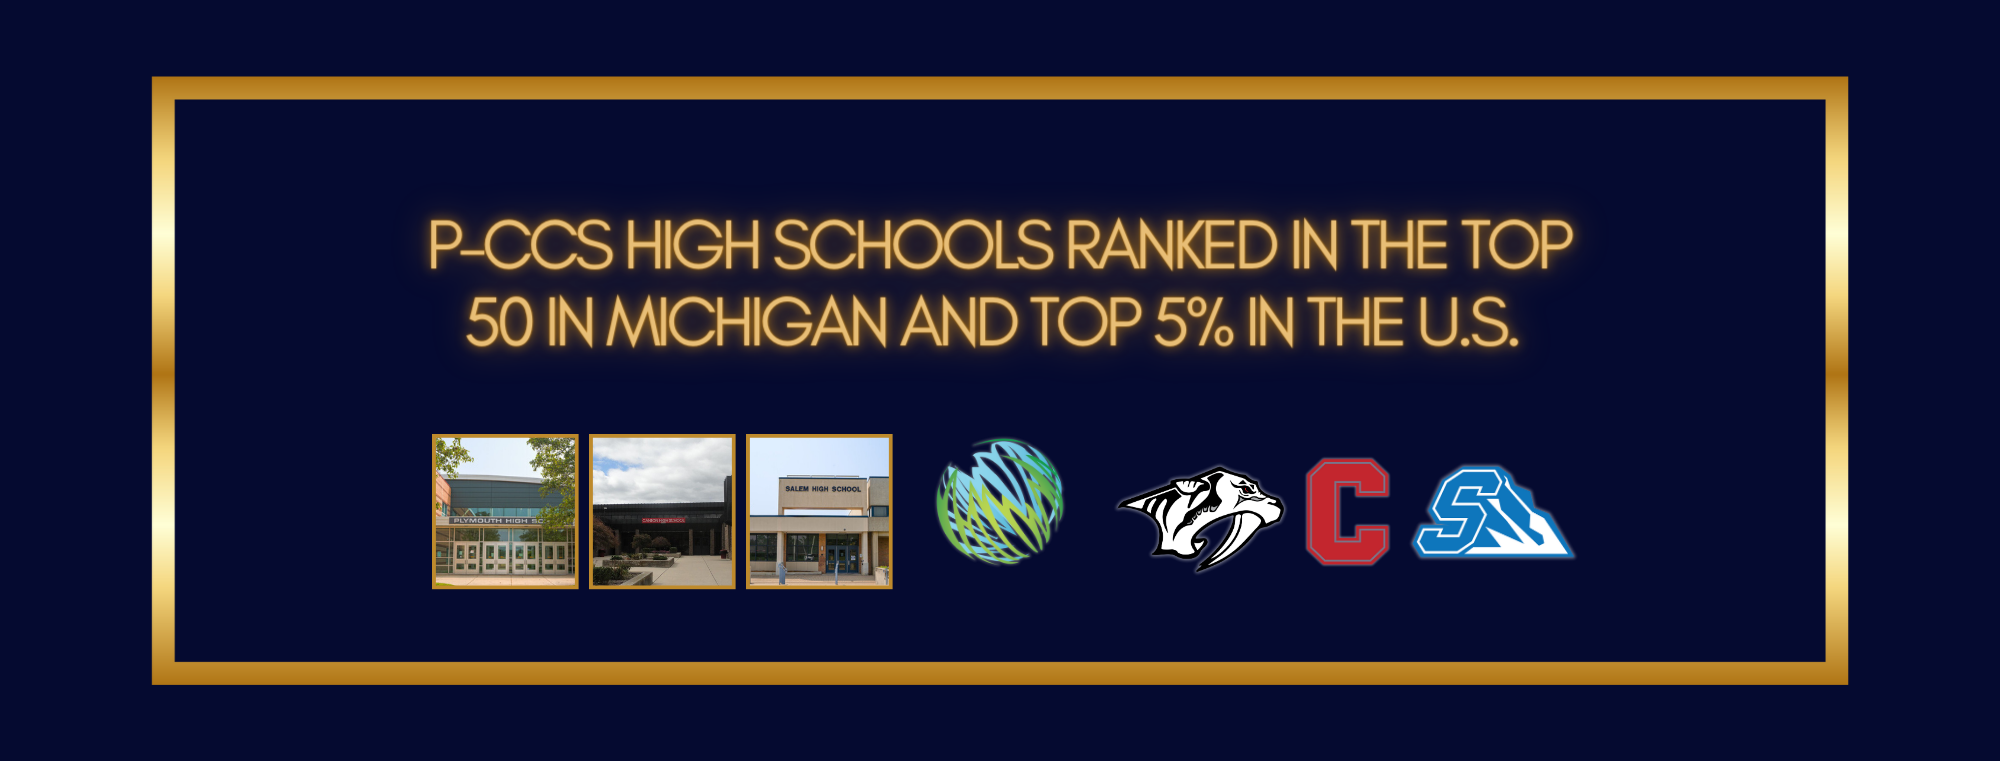 P-CCS High Schools Ranked in the Top 50 in Michigan and Top 5% in the US